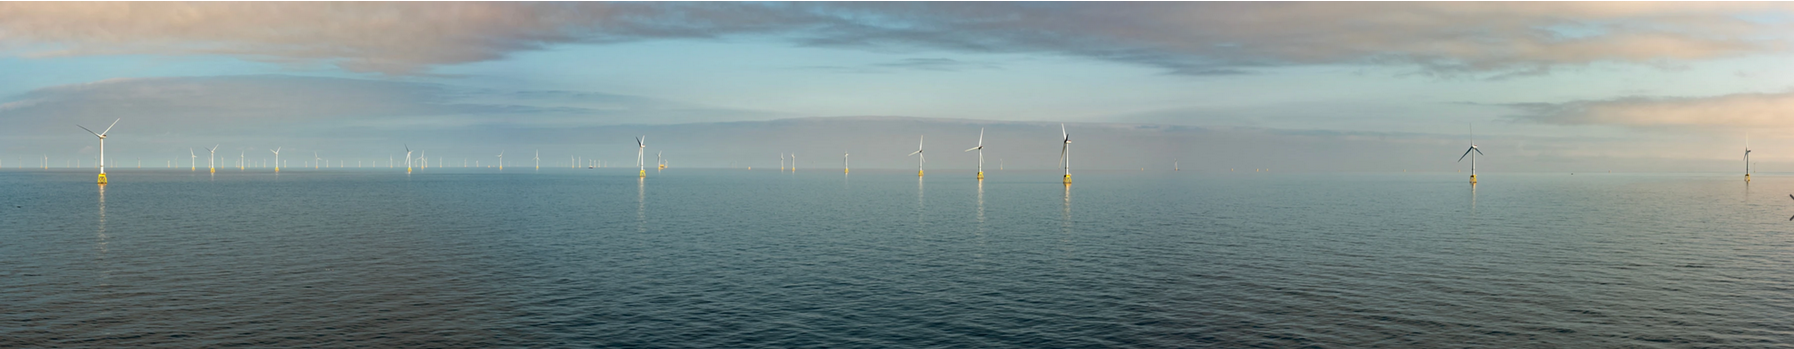 Final wind turbine installed at Scotland’s largest offshore wind farm